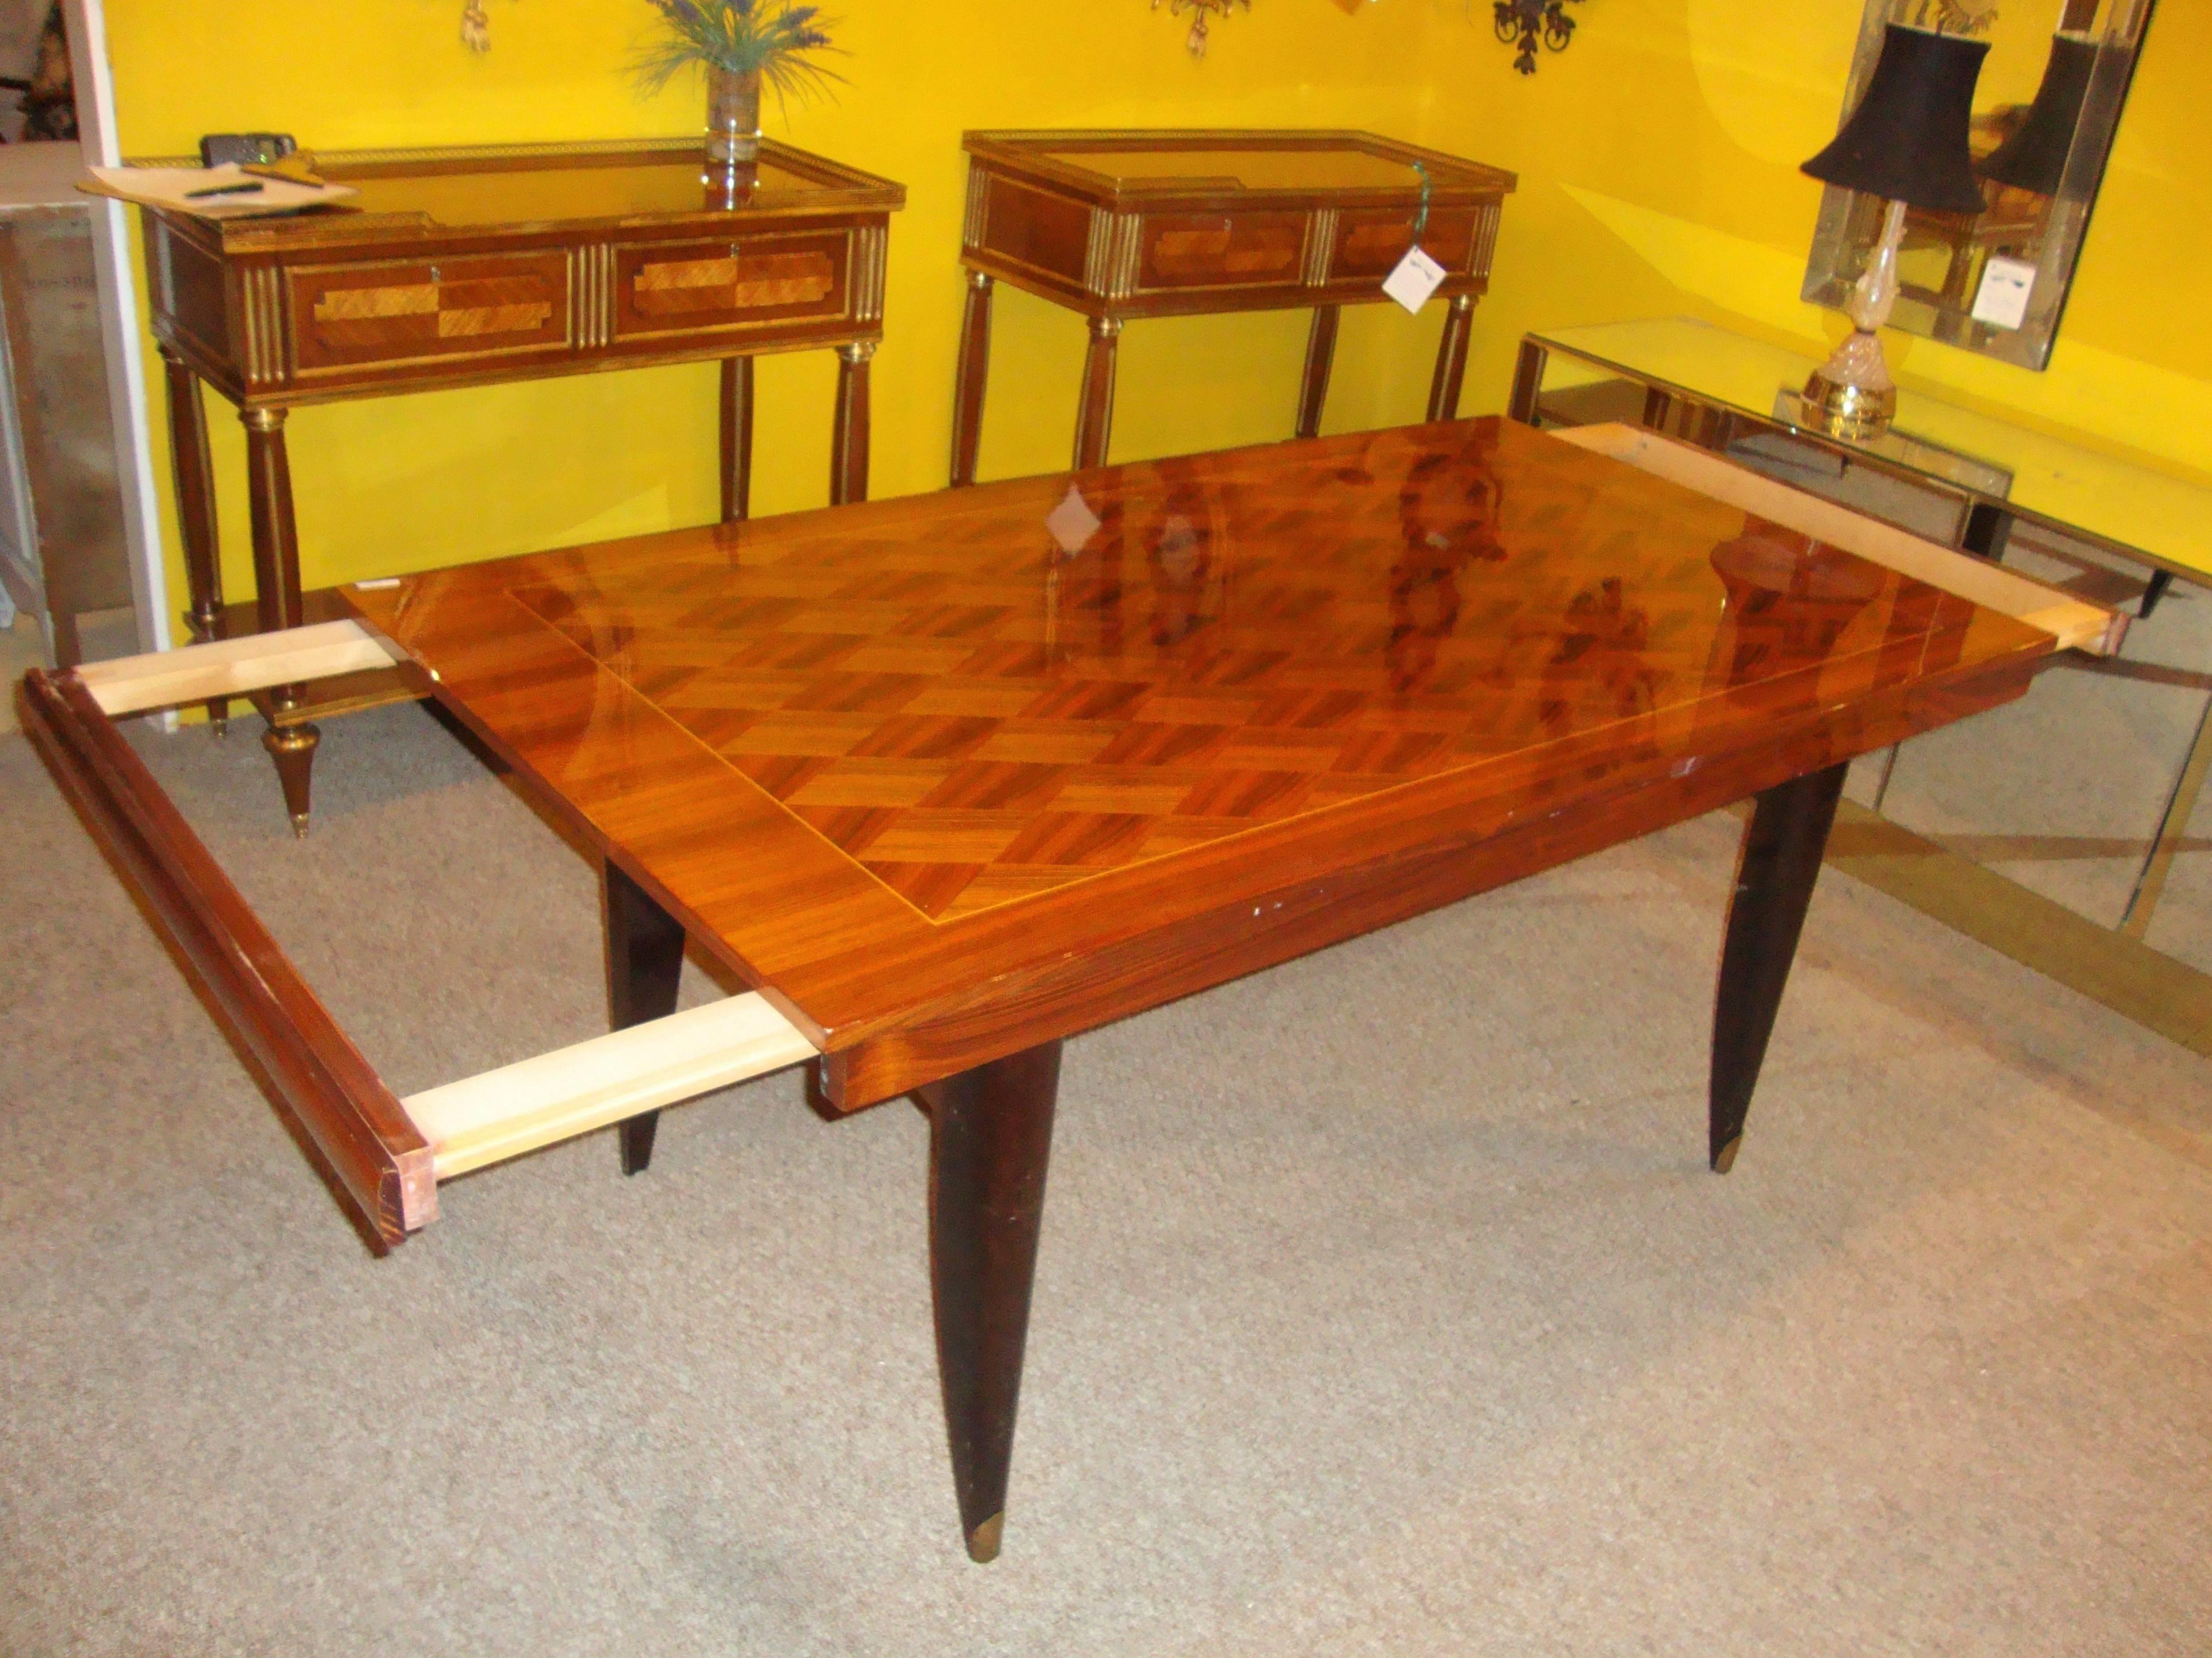 An Italian Mid-Century Modern parquetry inlaid dining table. This fine exotic wood dining table has four brass capped sprayed legs supporting the most decorative table top one could possibly fine. The table itself with two pullout extensions for